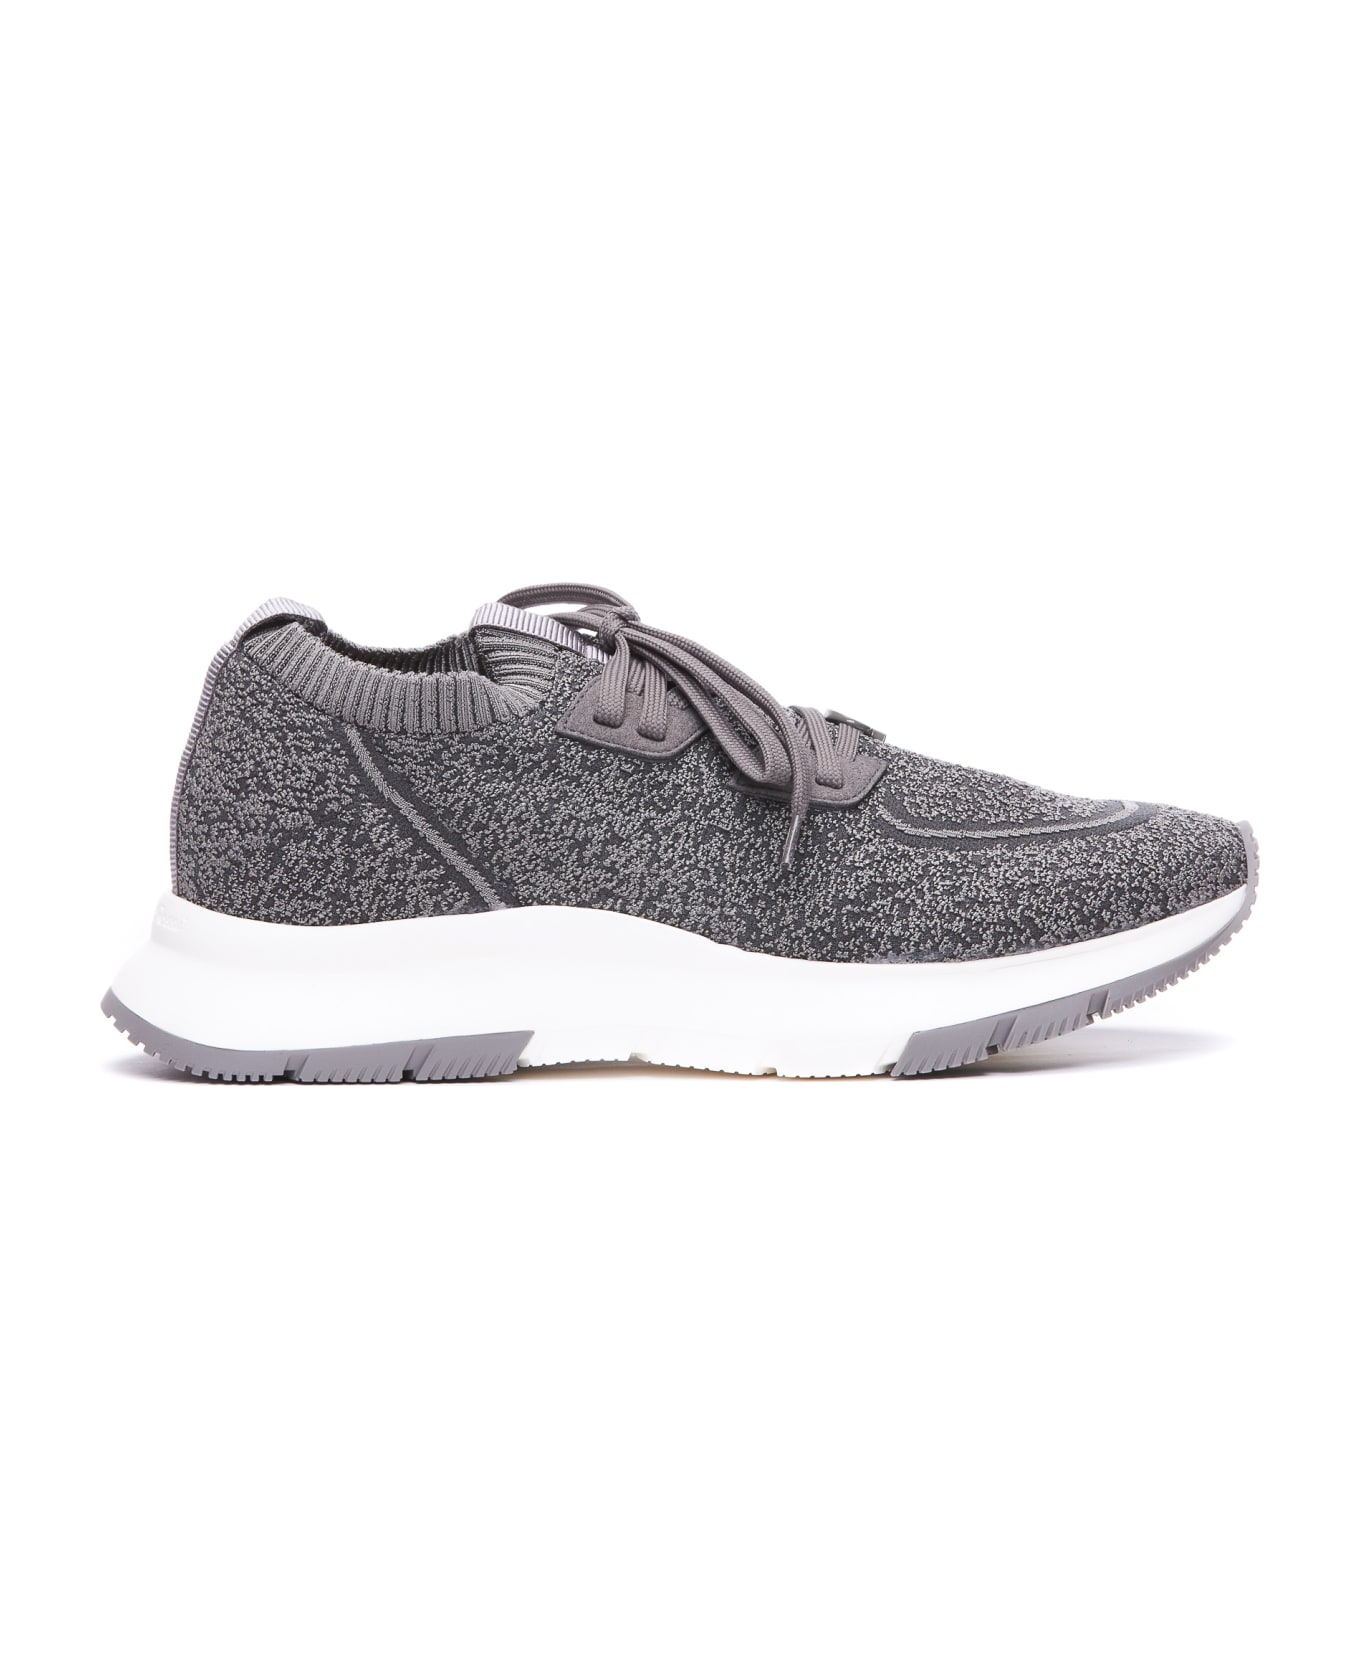 Gianvito Rossi Glover Sneakers - Grey スニーカー